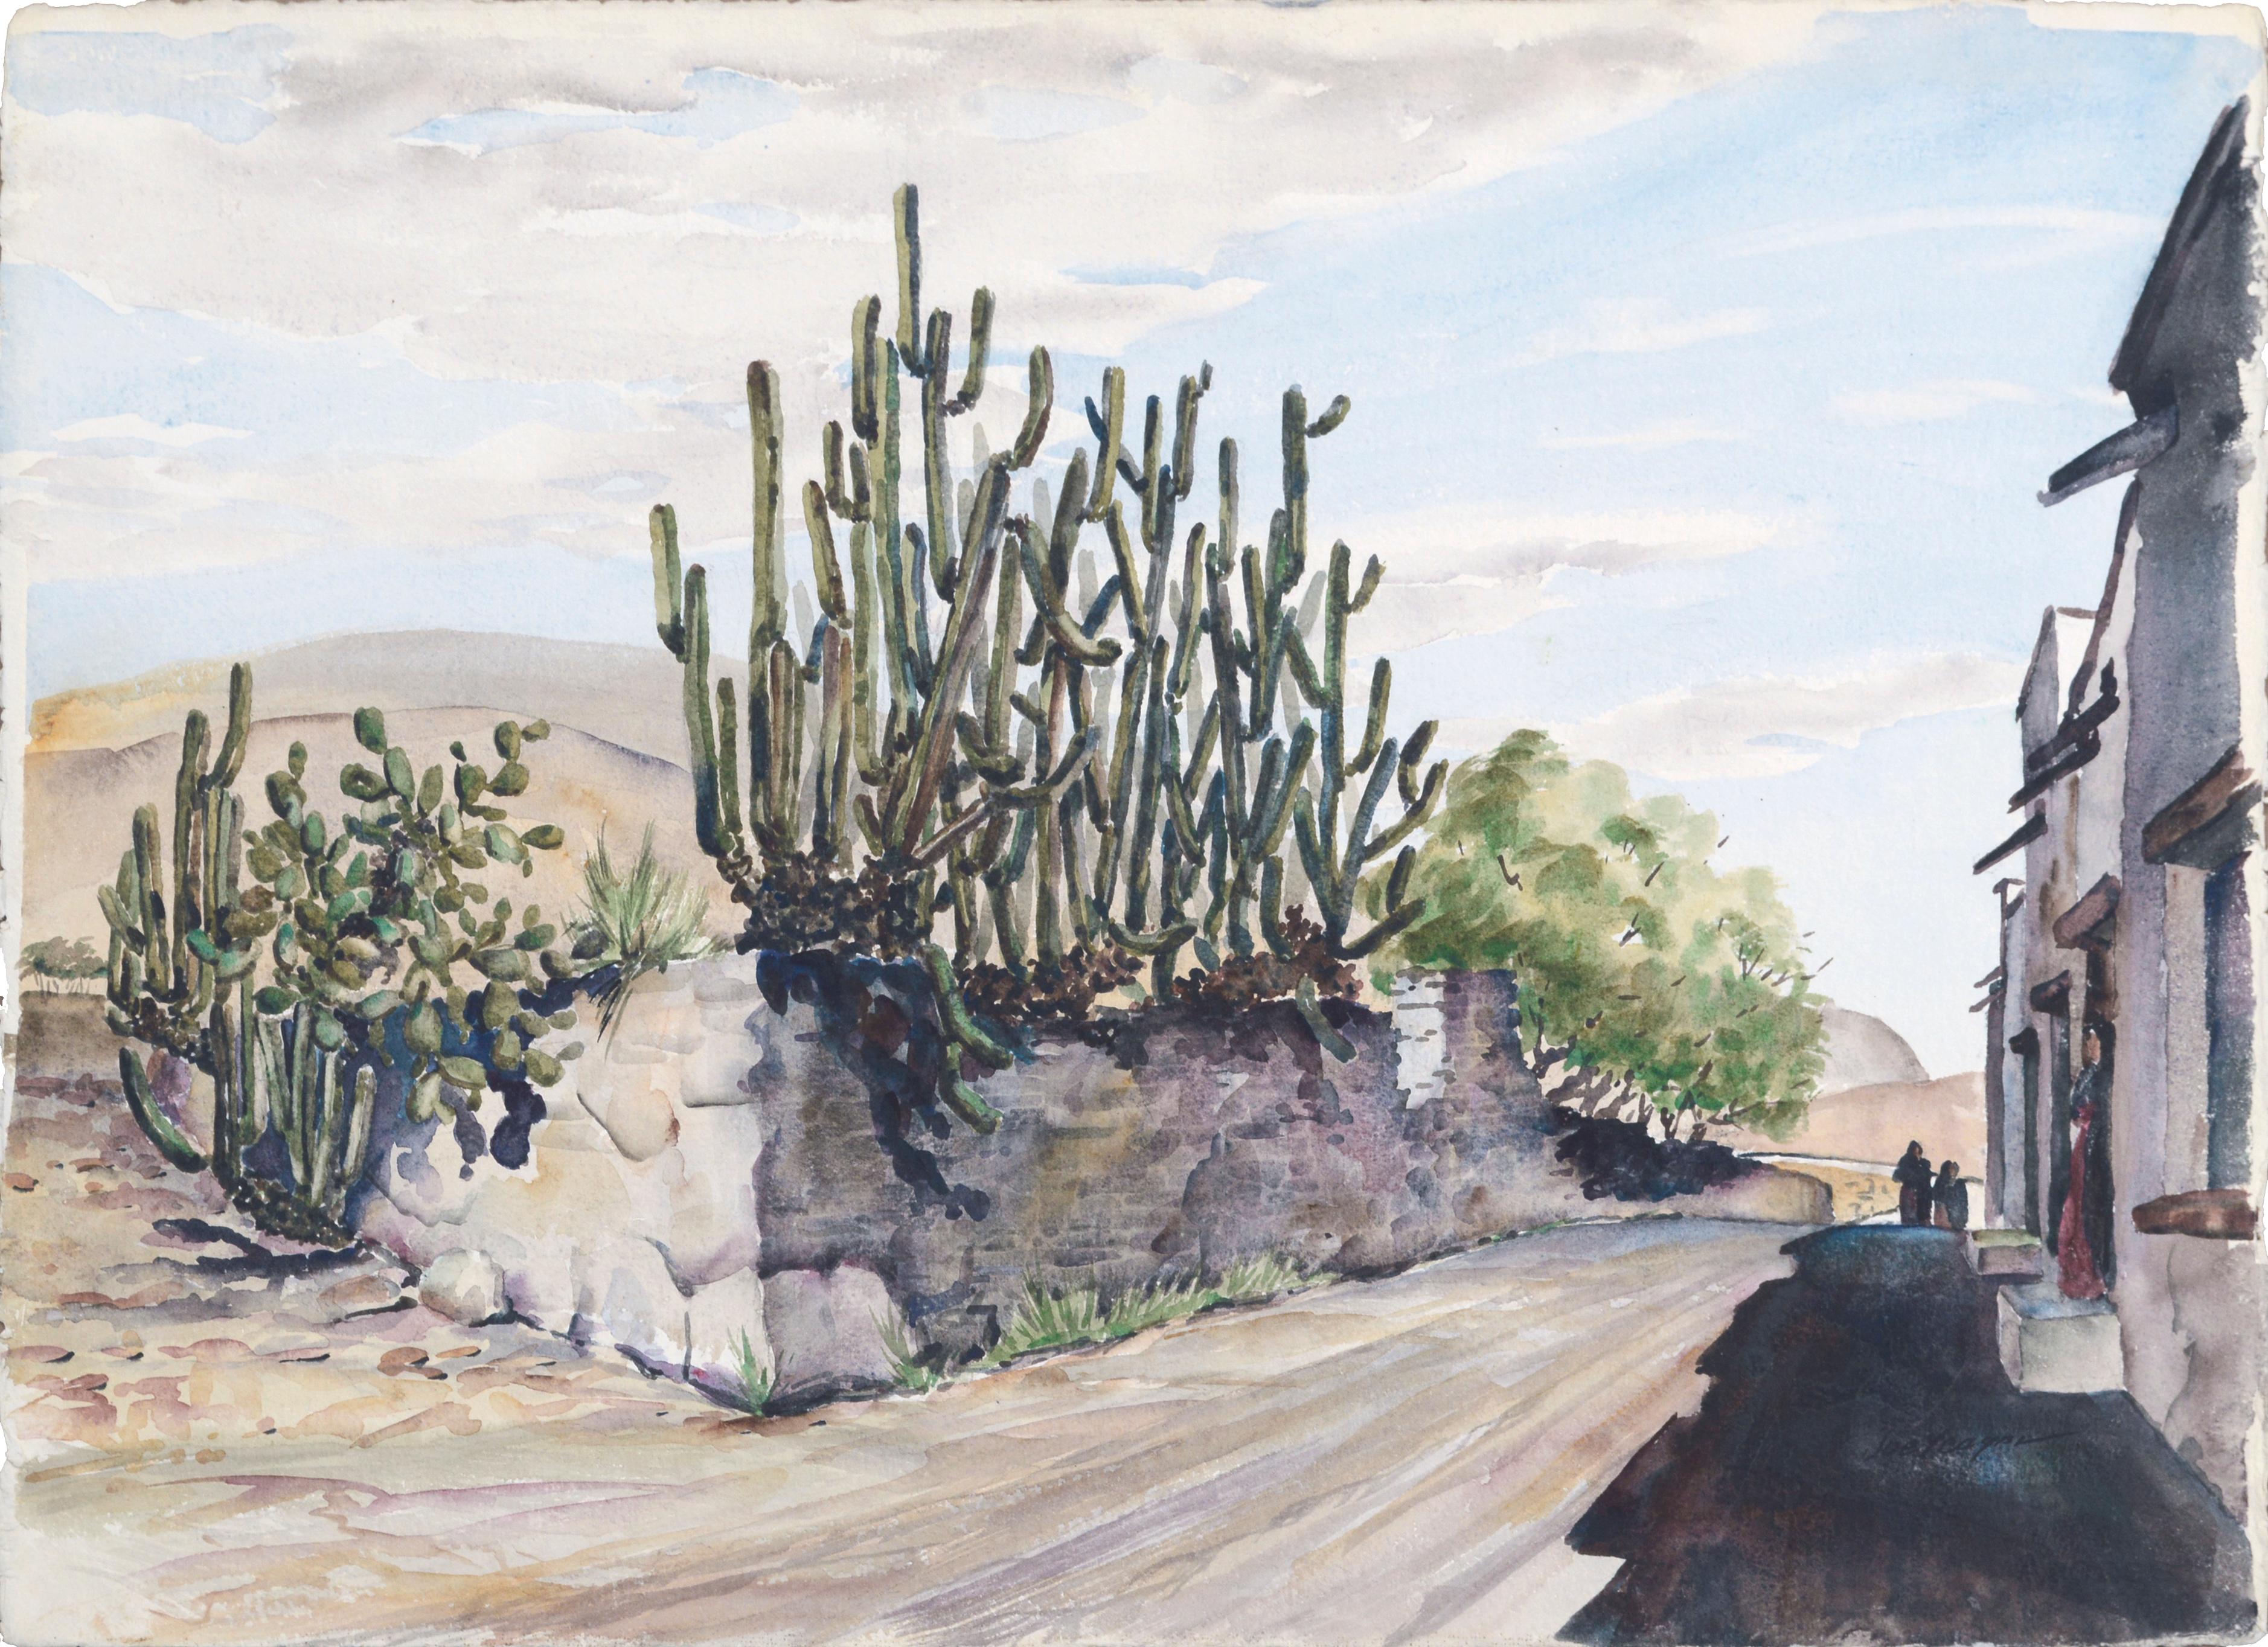 Joseph Yeager Figurative Art - Cacti on a Mexican Street - Midcentury Figurative Landscape